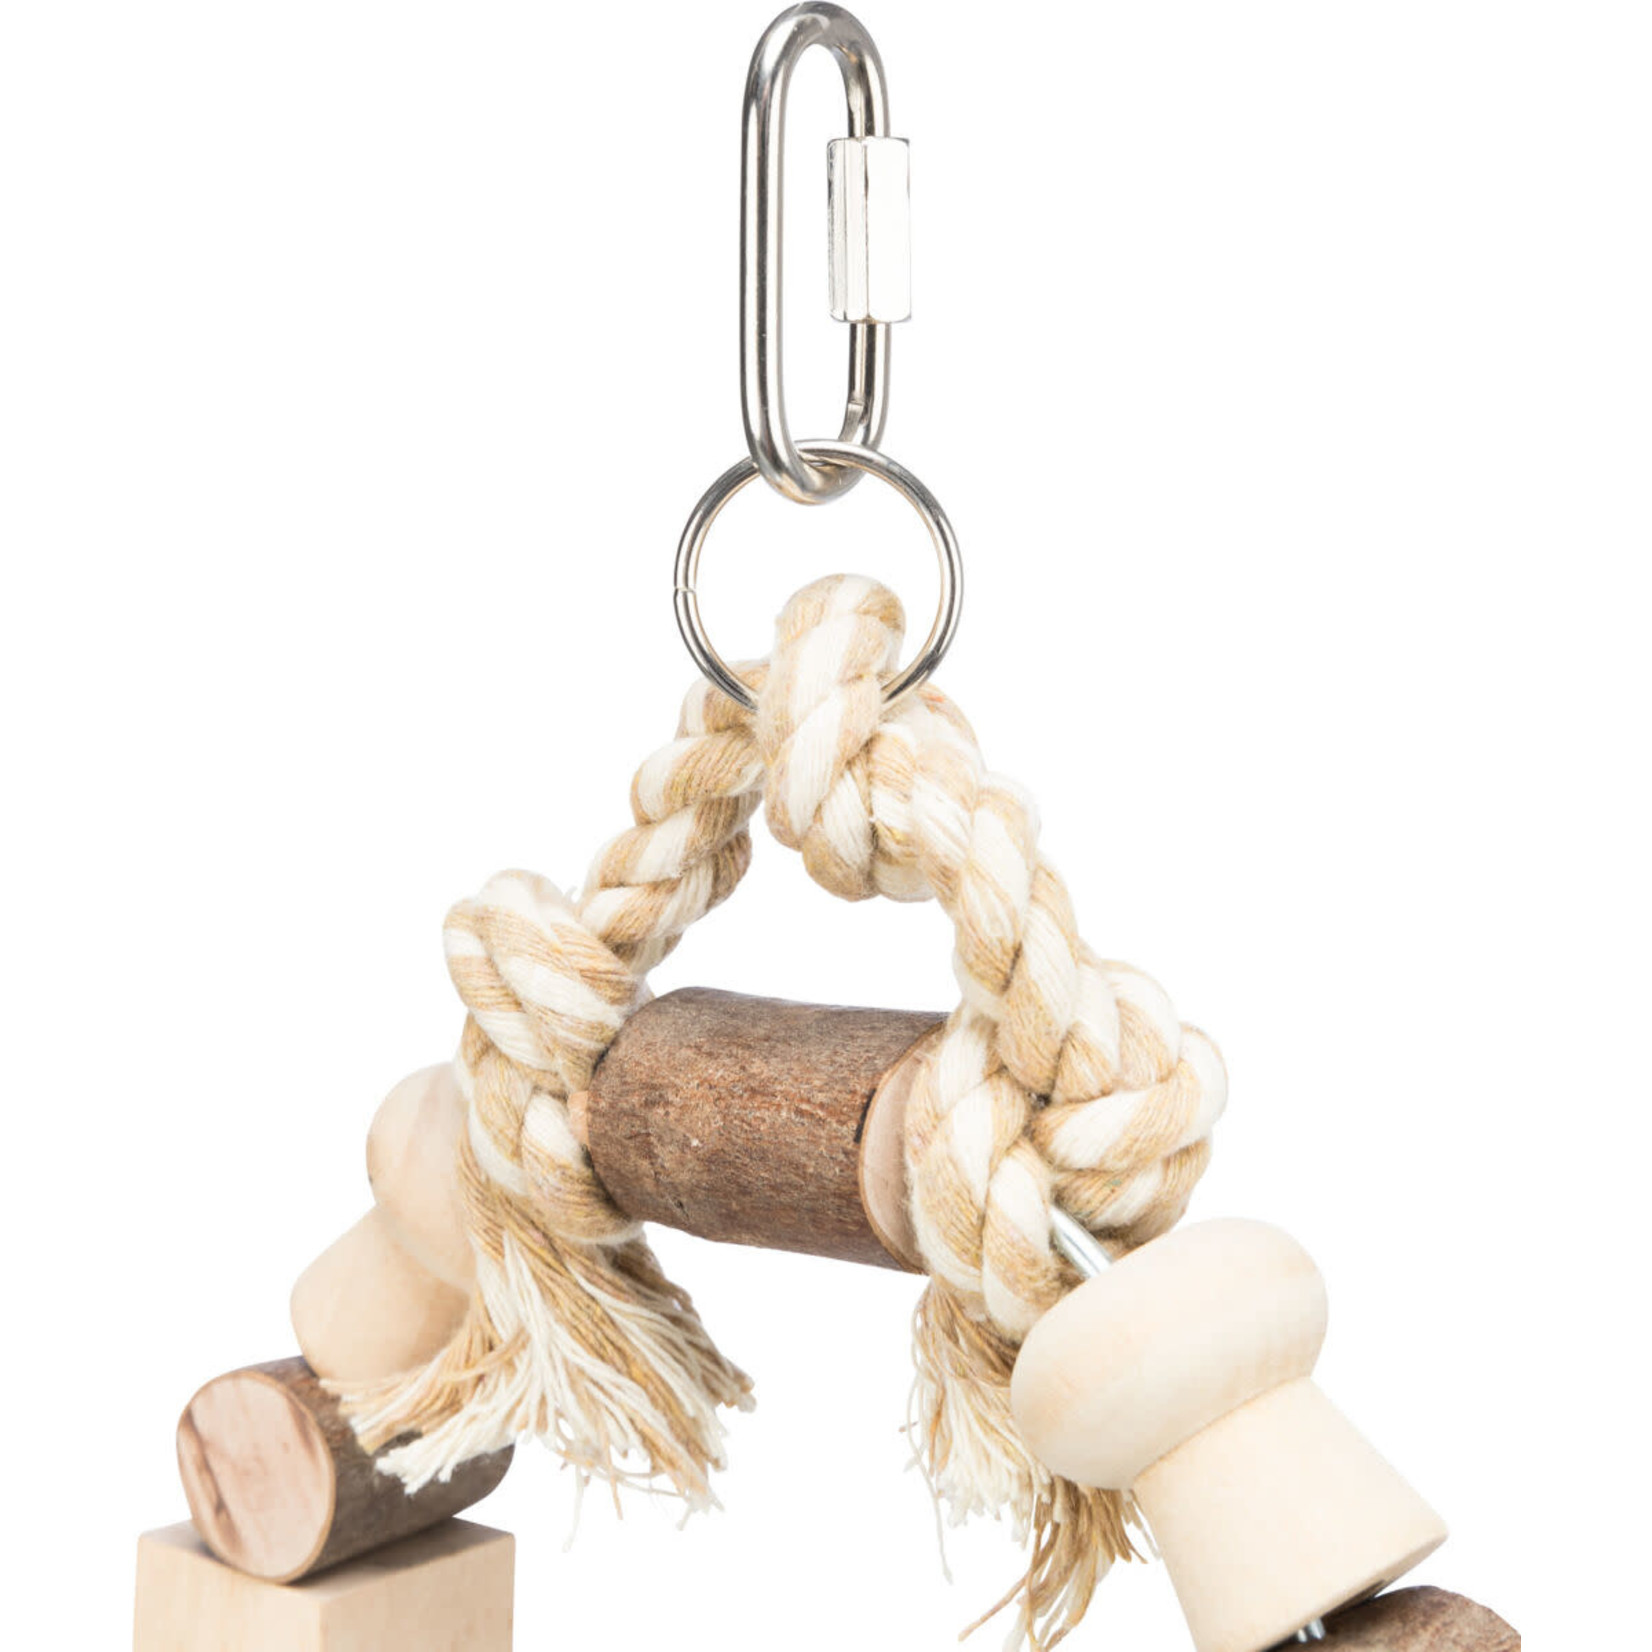 Trixie Arch Swing Wooden Cage Bird Toy, 13 x 19cm